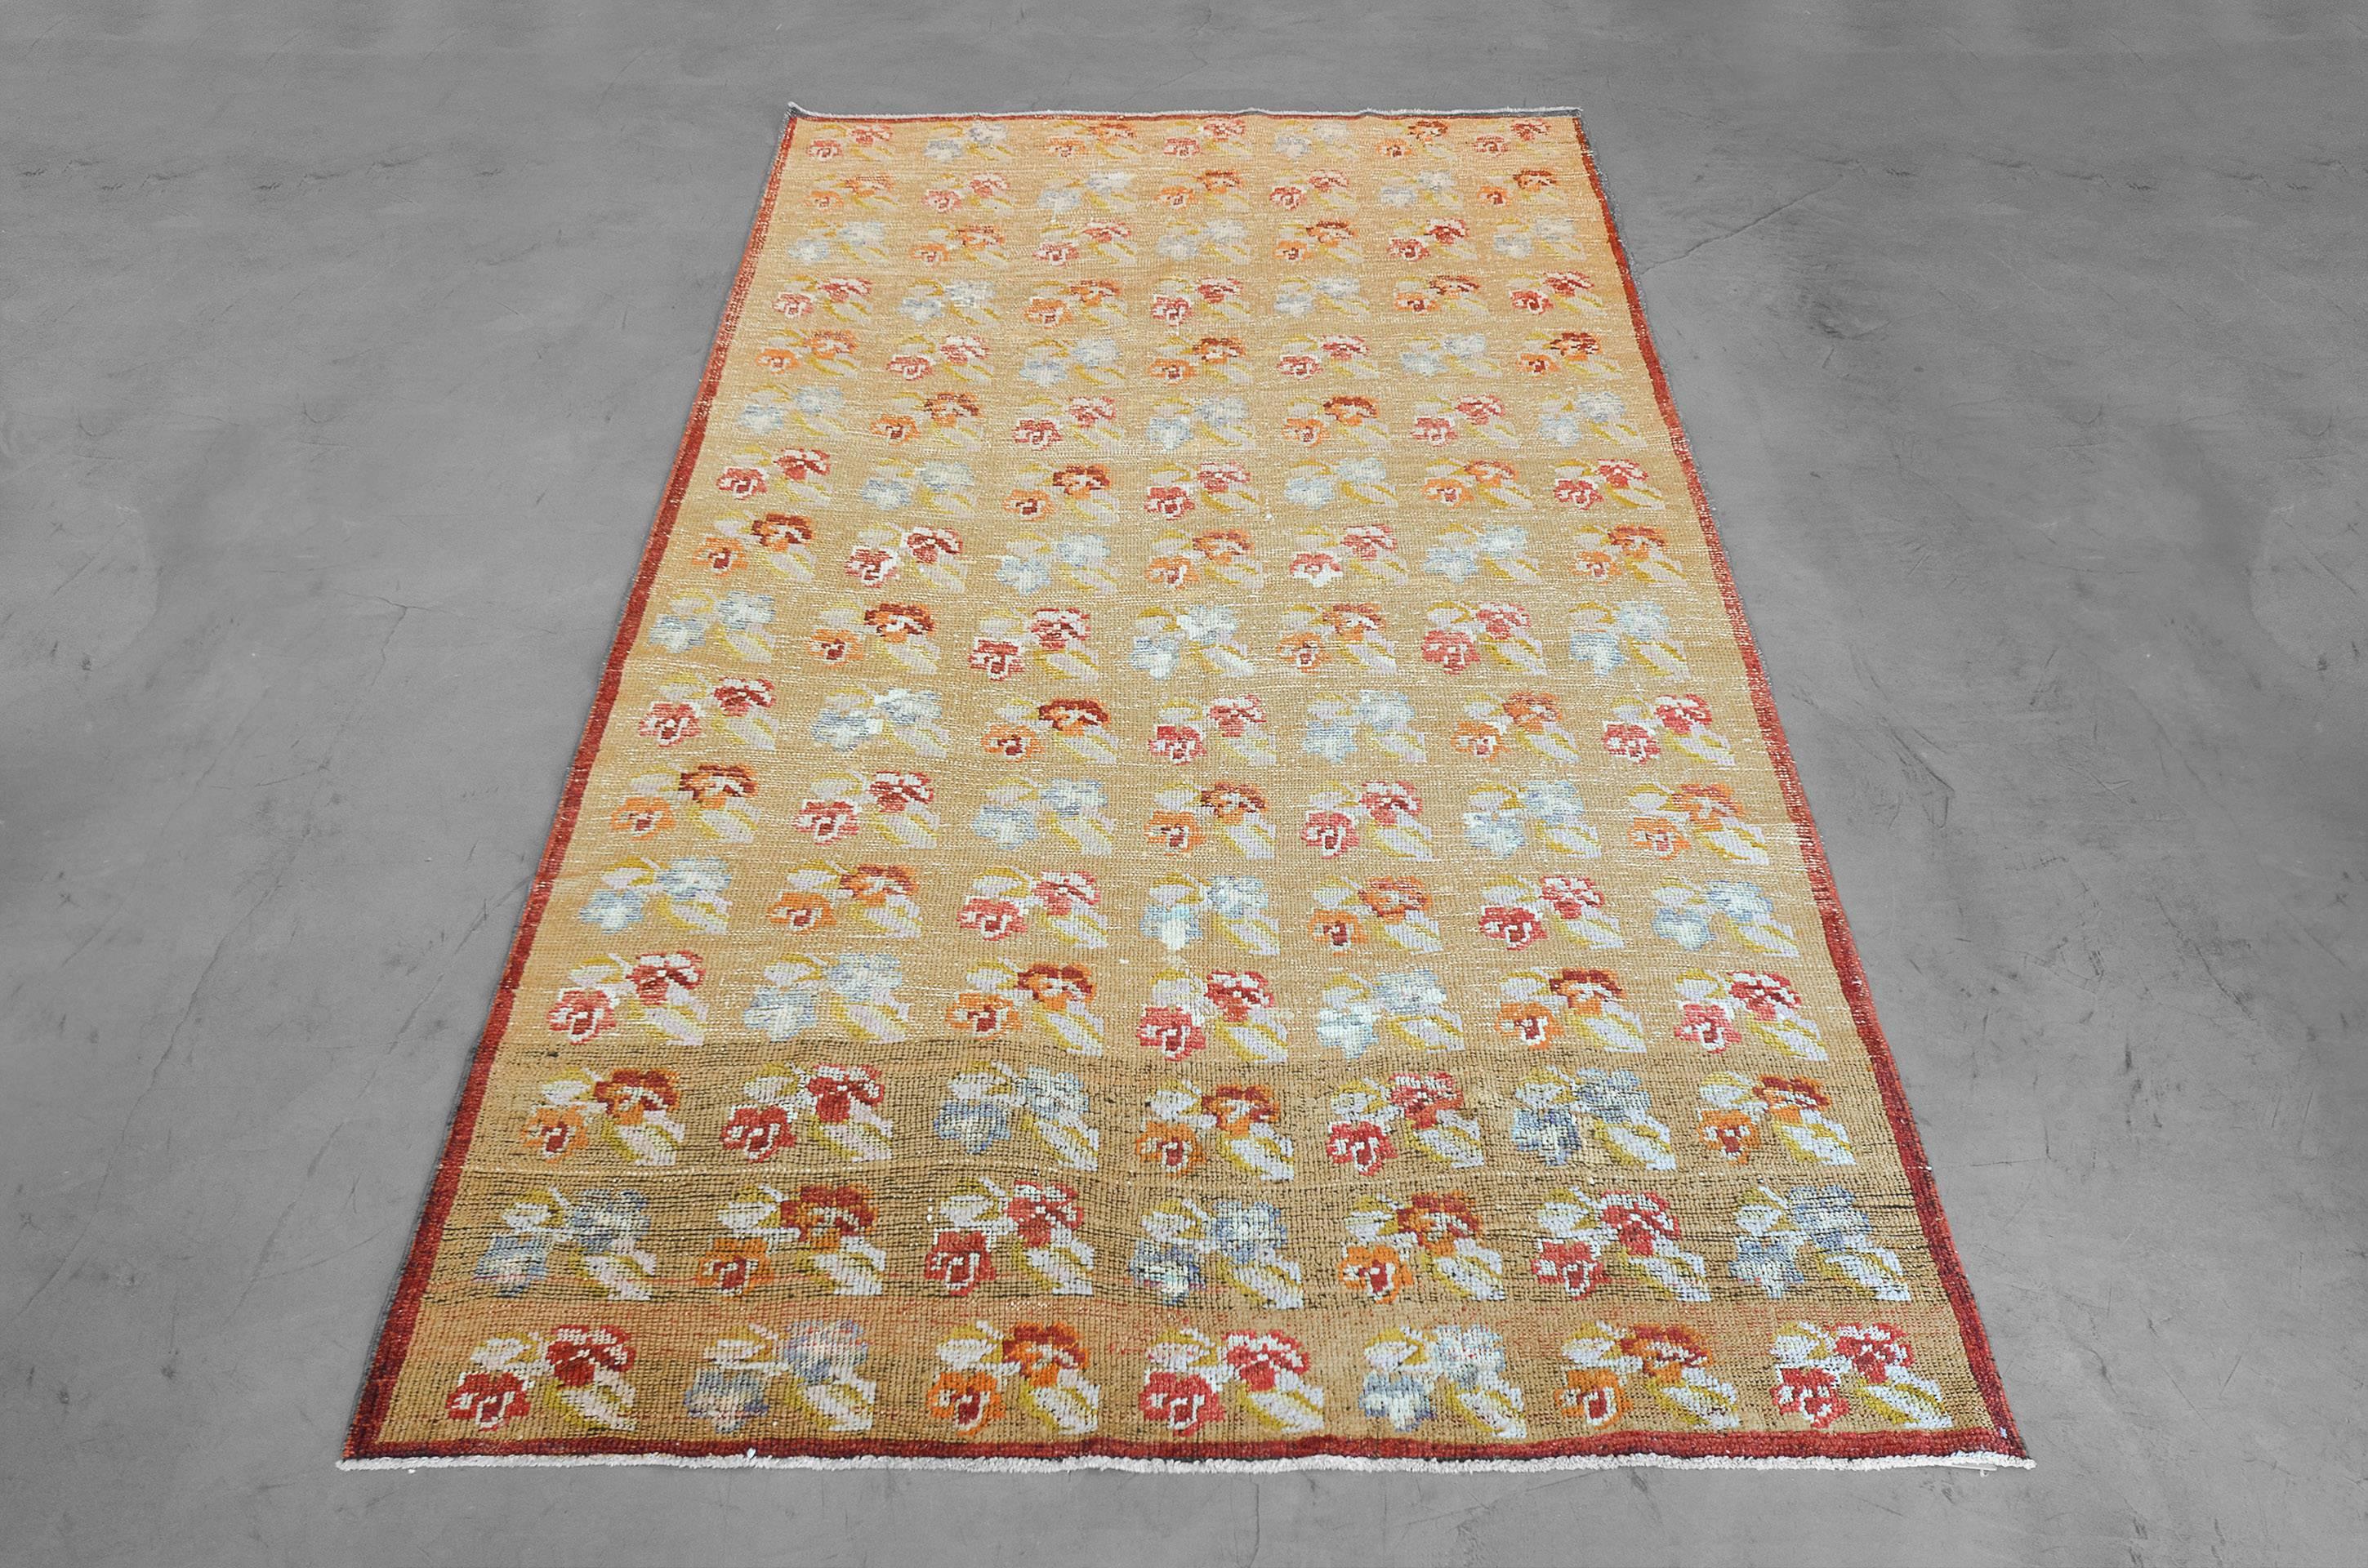 Vintage wool floral in warm tones worn to perfection, hand-knotted in Turkey in the late 20th century. An earthy red border acts as a delicate outline to this fashionable rug. Sized at 5’6 x 9’2” this rug works well for a small seating area or an